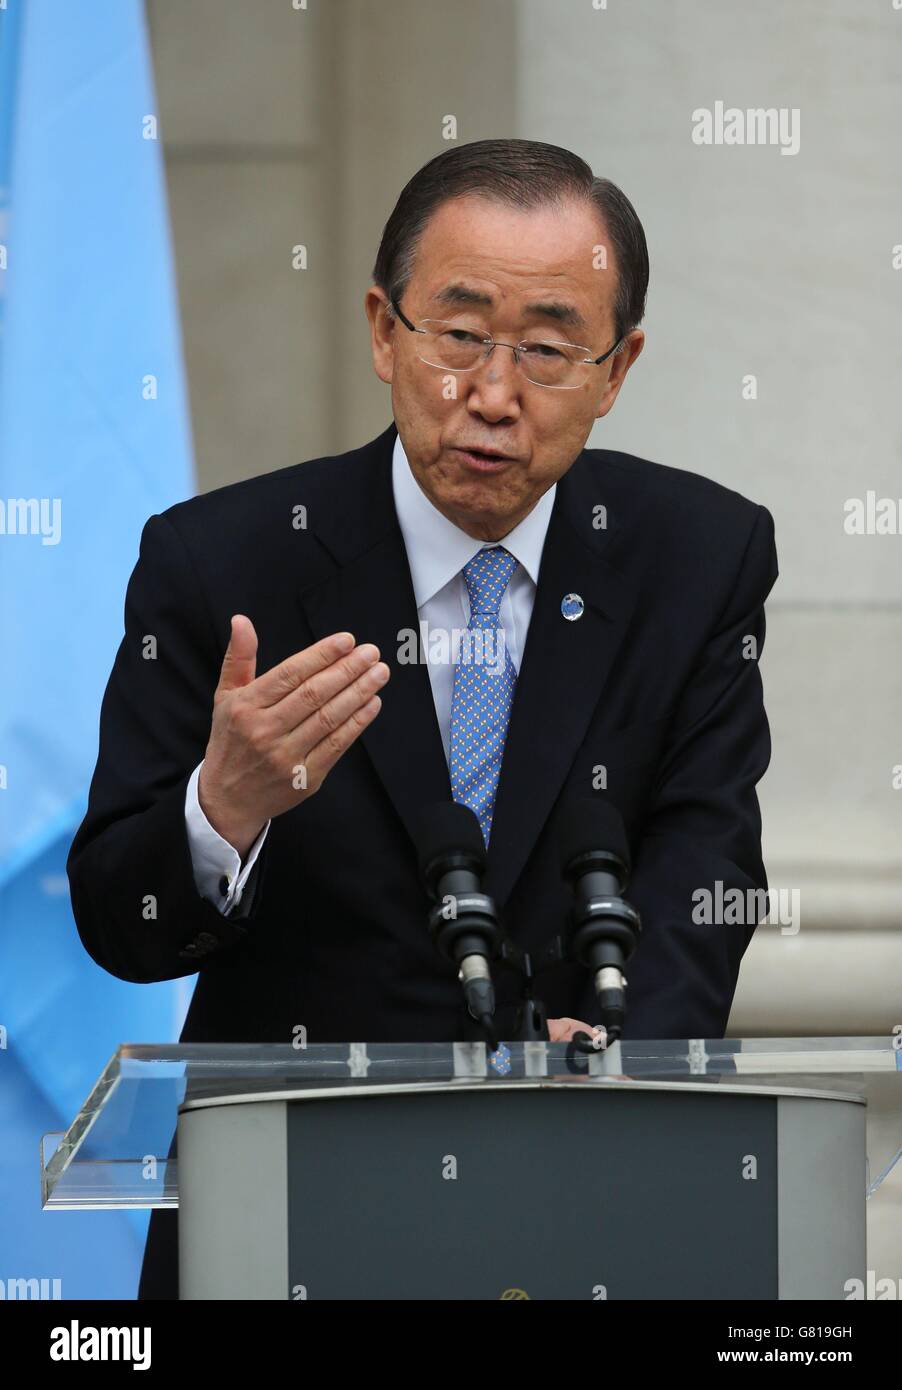 UN secretary general Ban Ki-moon speaks to the media at Government Buildings in Dublin. Stock Photo